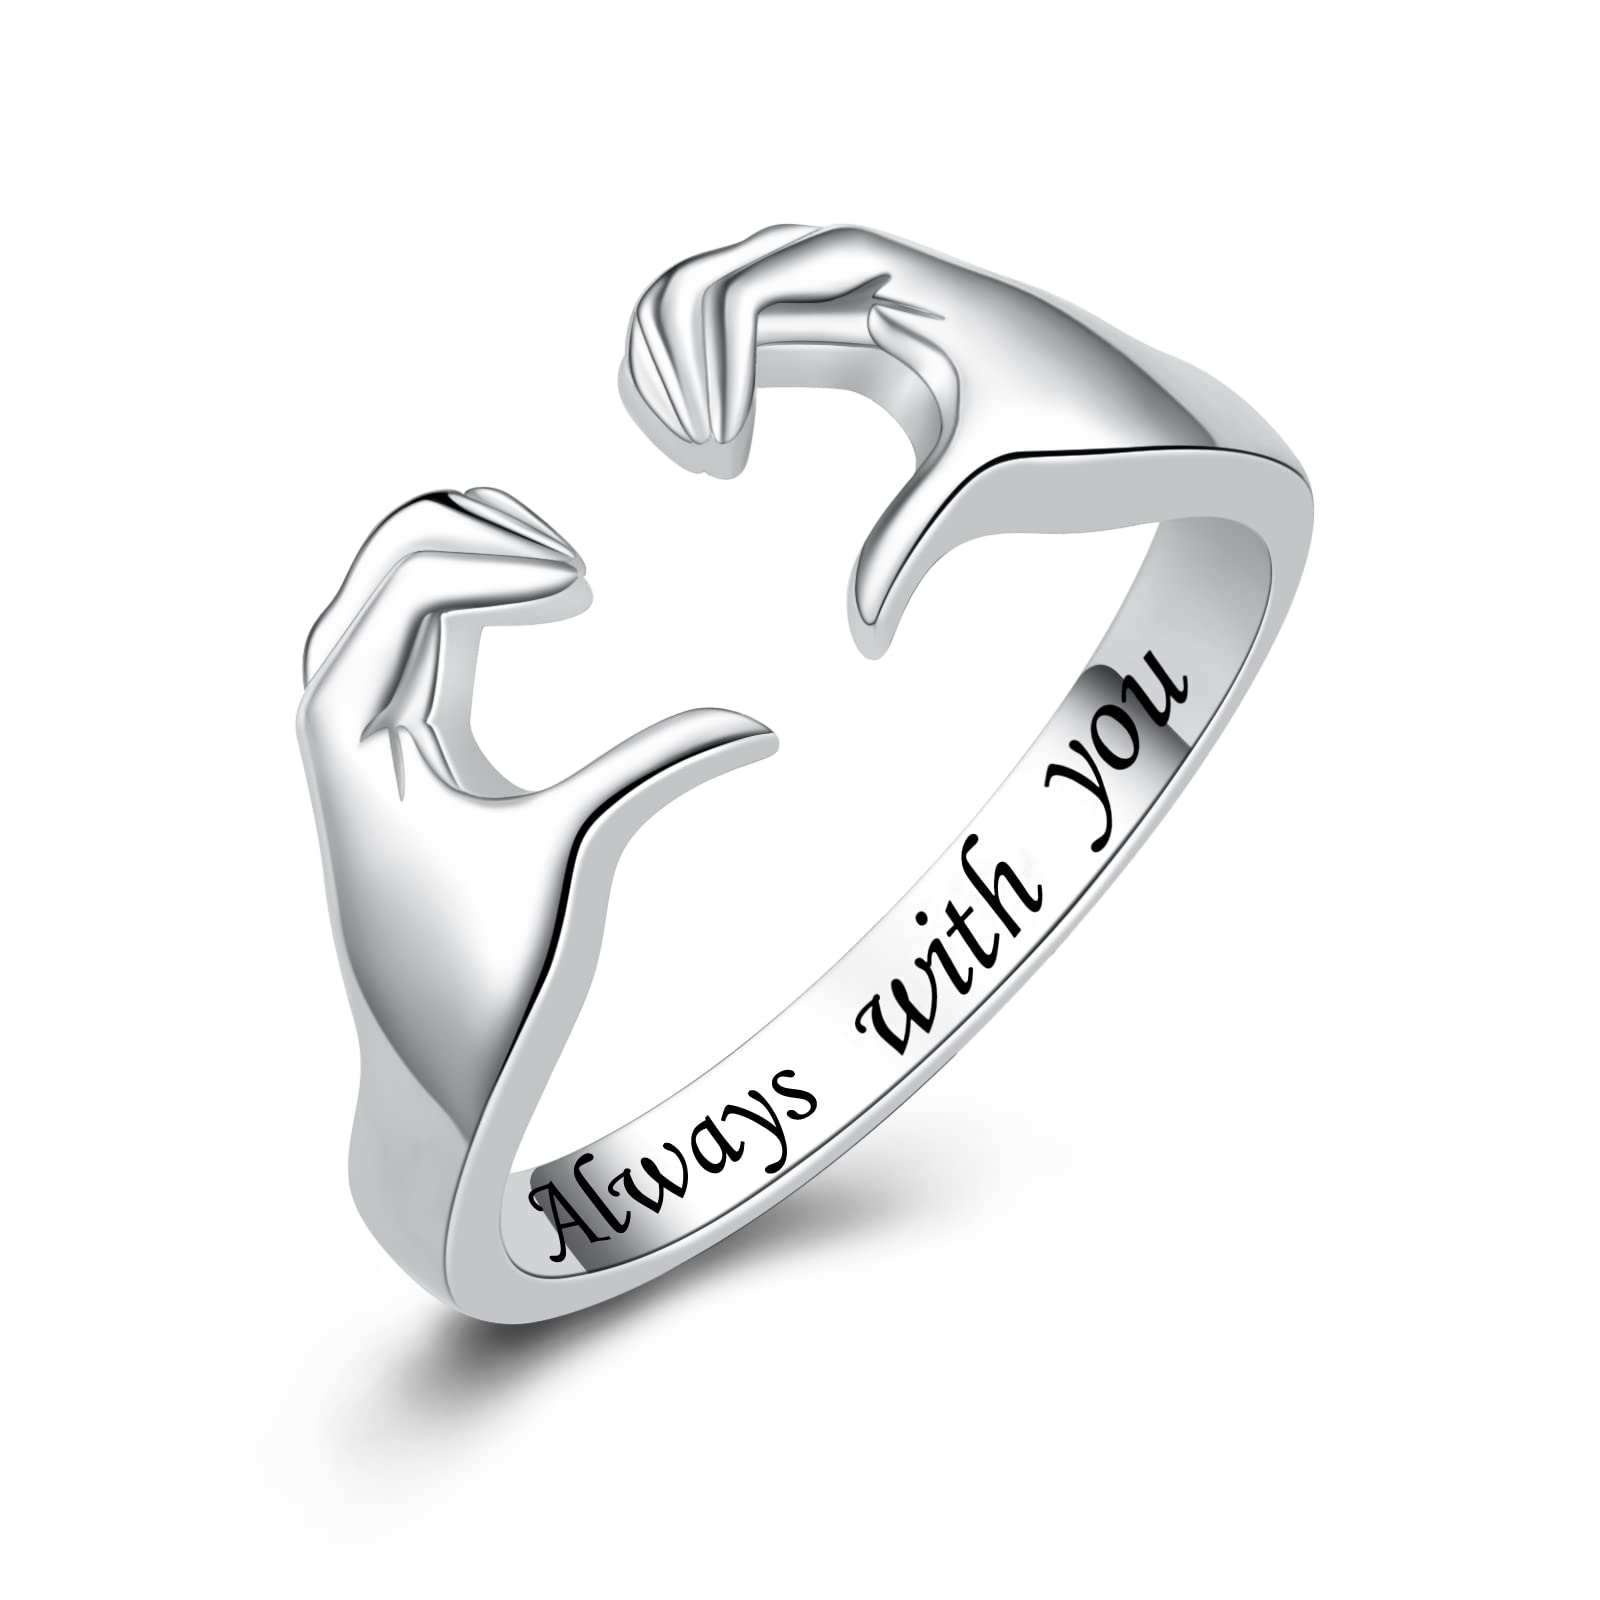 Buy Queen & King Limited Edition Love Valentine Sterling Silver Couple Rings  Online at Low Prices in India - Paytmmall.com